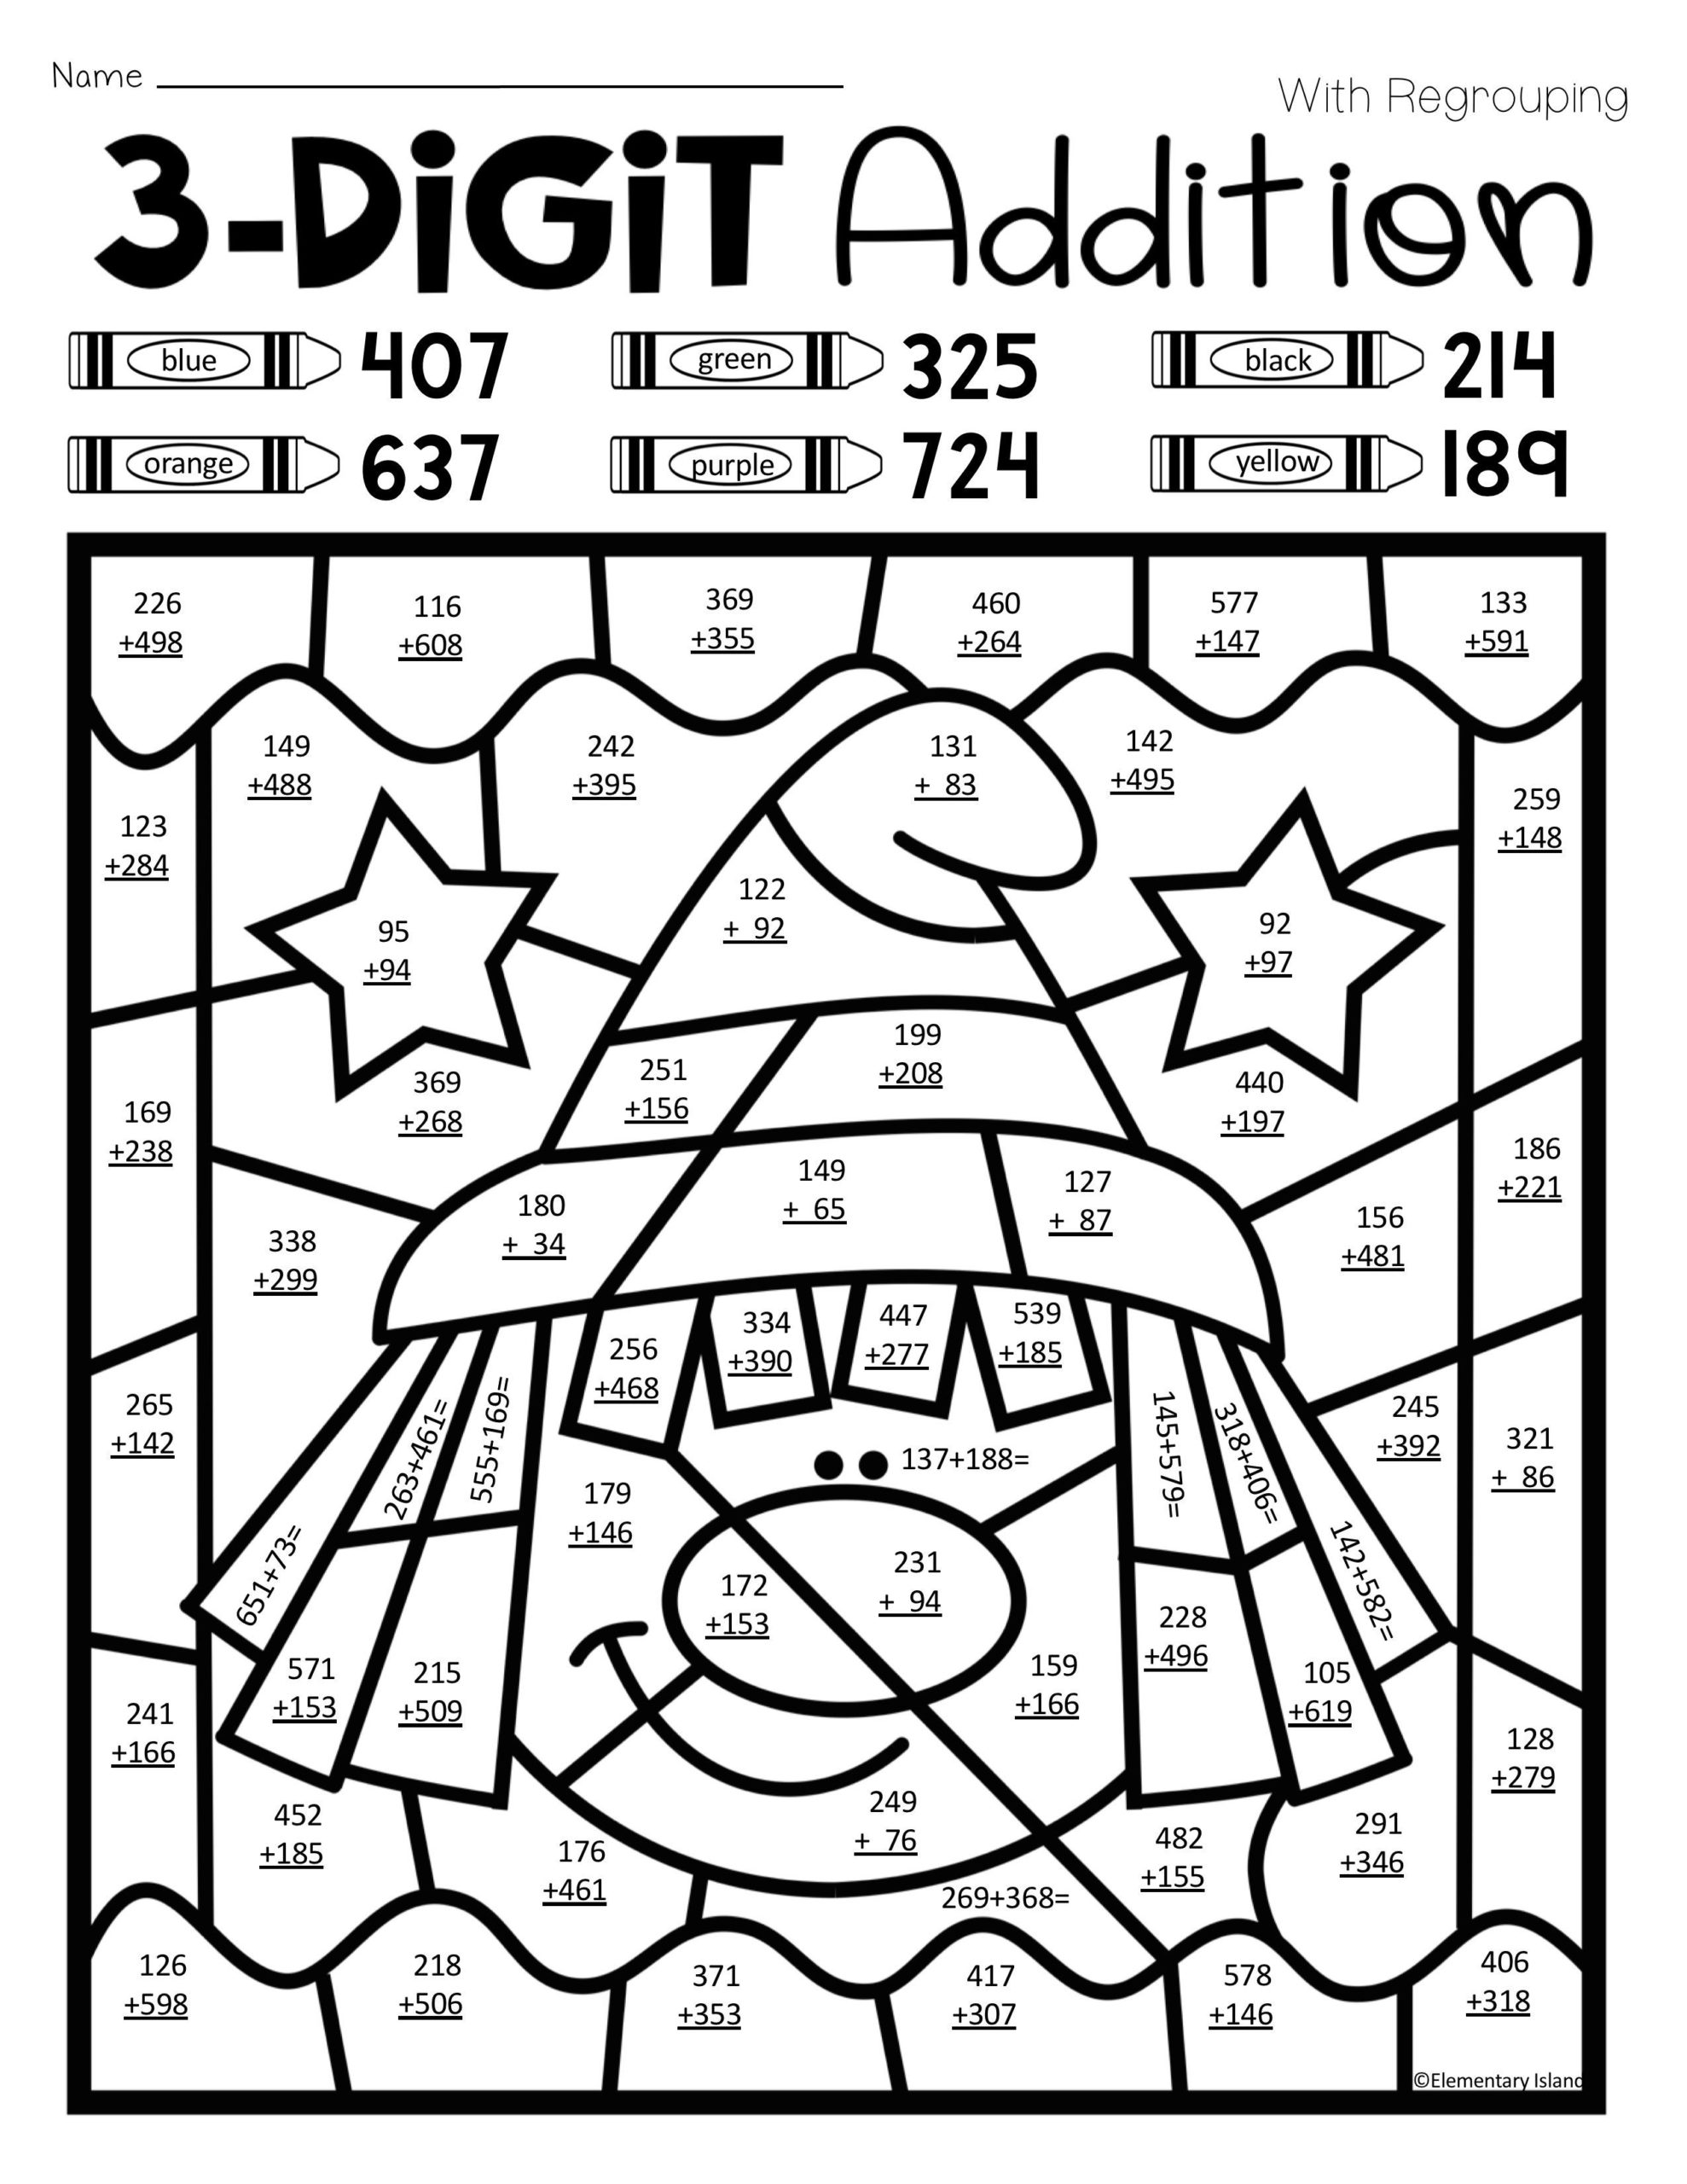 Math Sheets Coloring Pages Coloring Home